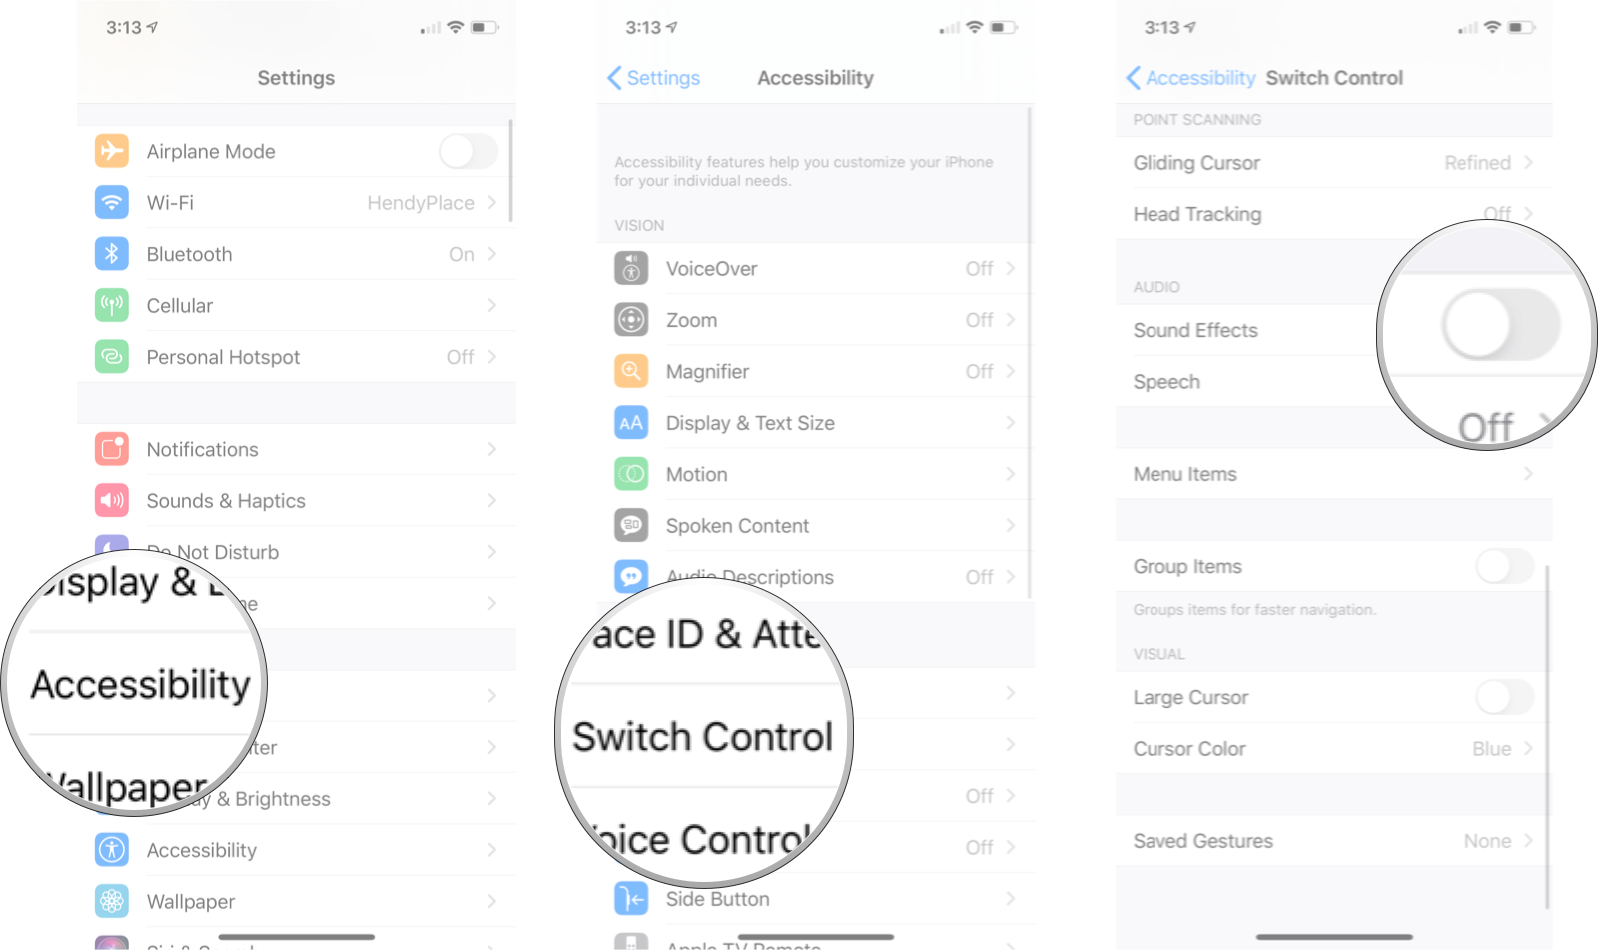 Enable Sound Effects Switch Control: Launch Switch Control Settings: Launch Settings, Tap accessibility, tap Switch Control, and then tap the sound effects on/off switch.